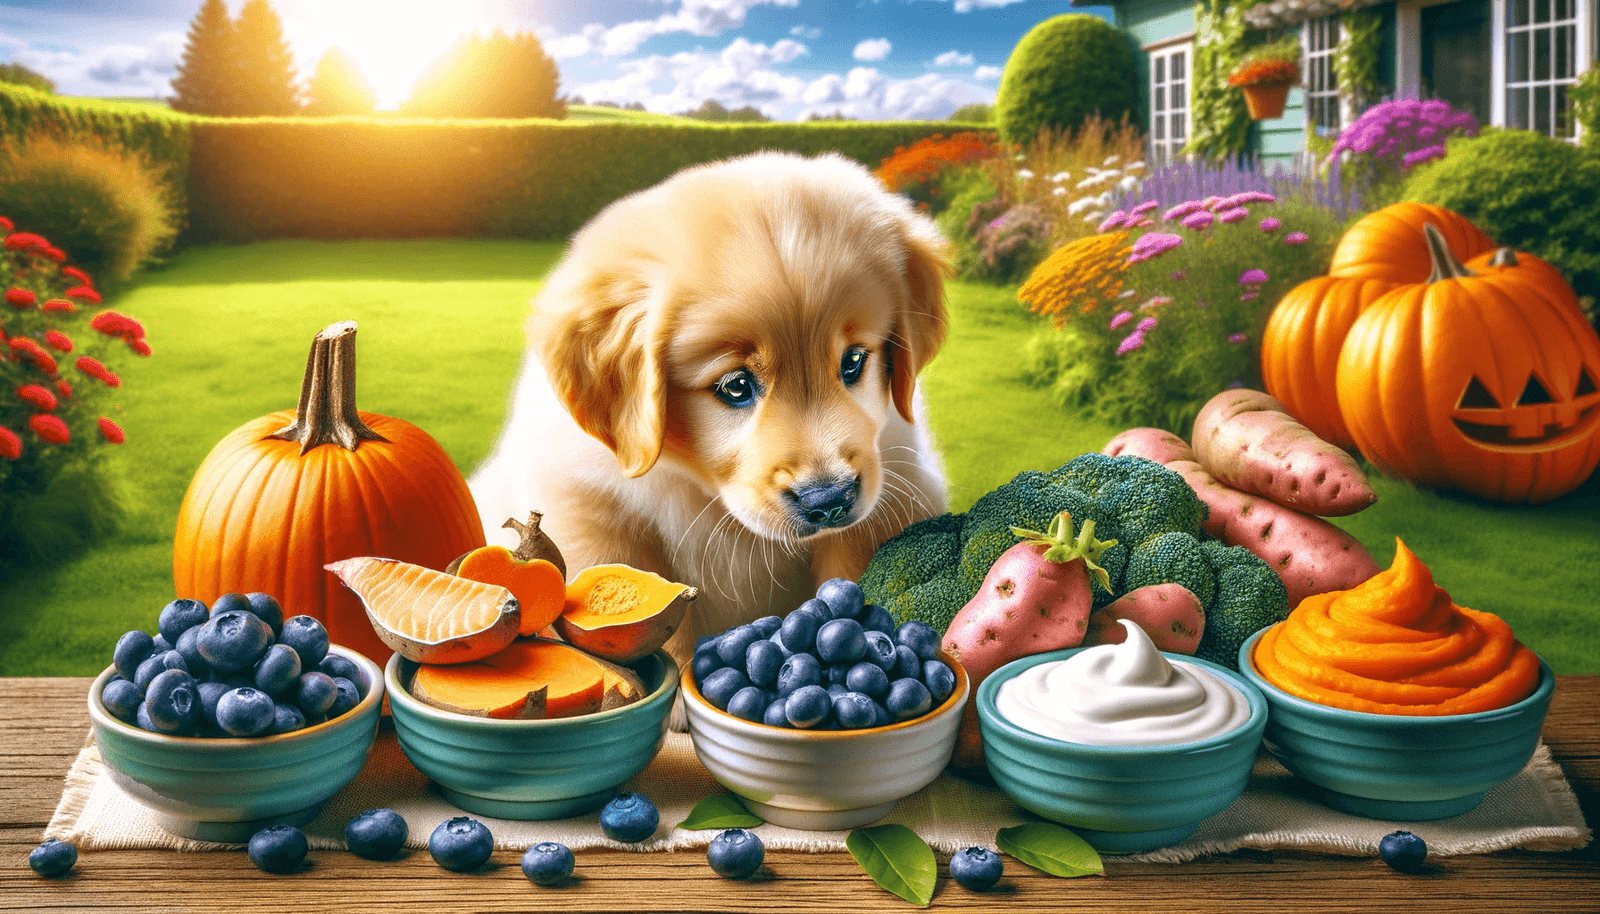 A Labrador puppy in a summer garden. His attention is drawn to the table laden with fruit, veg and other super foods such as yoghurt.